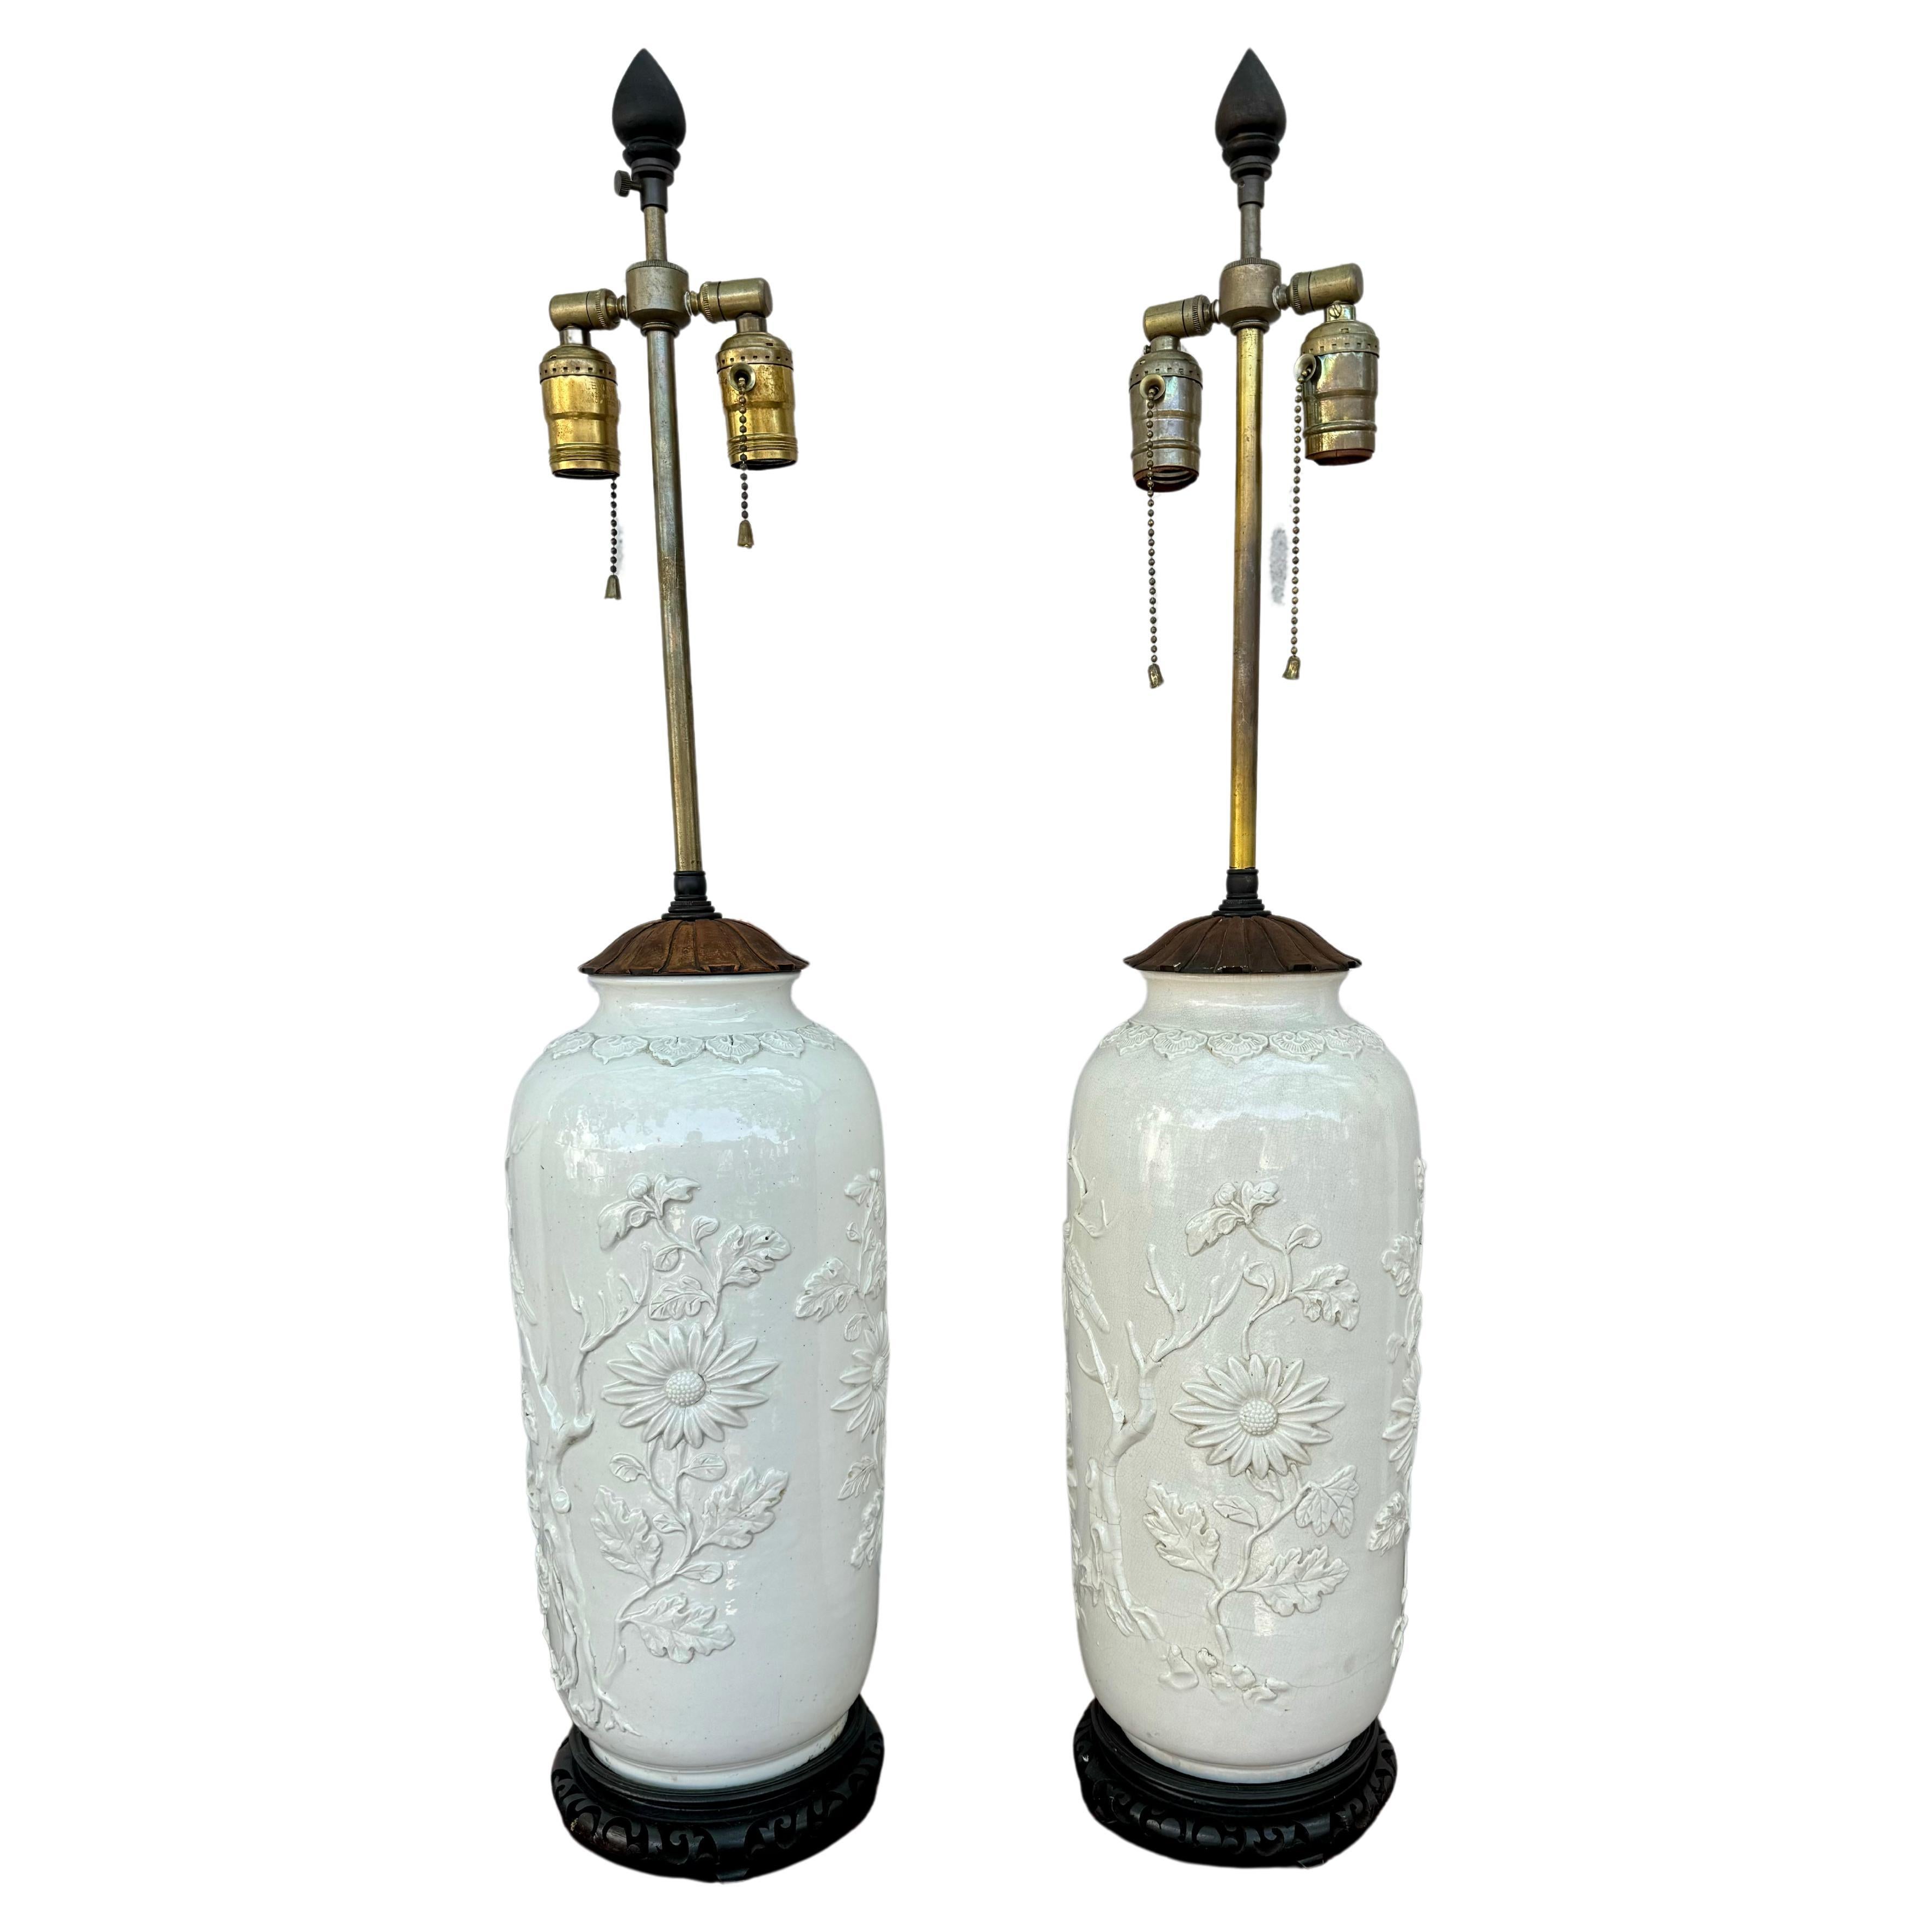 Chinese Export Blanc De Chine Porcelain Cylindrical Vases Mounted as Lamps